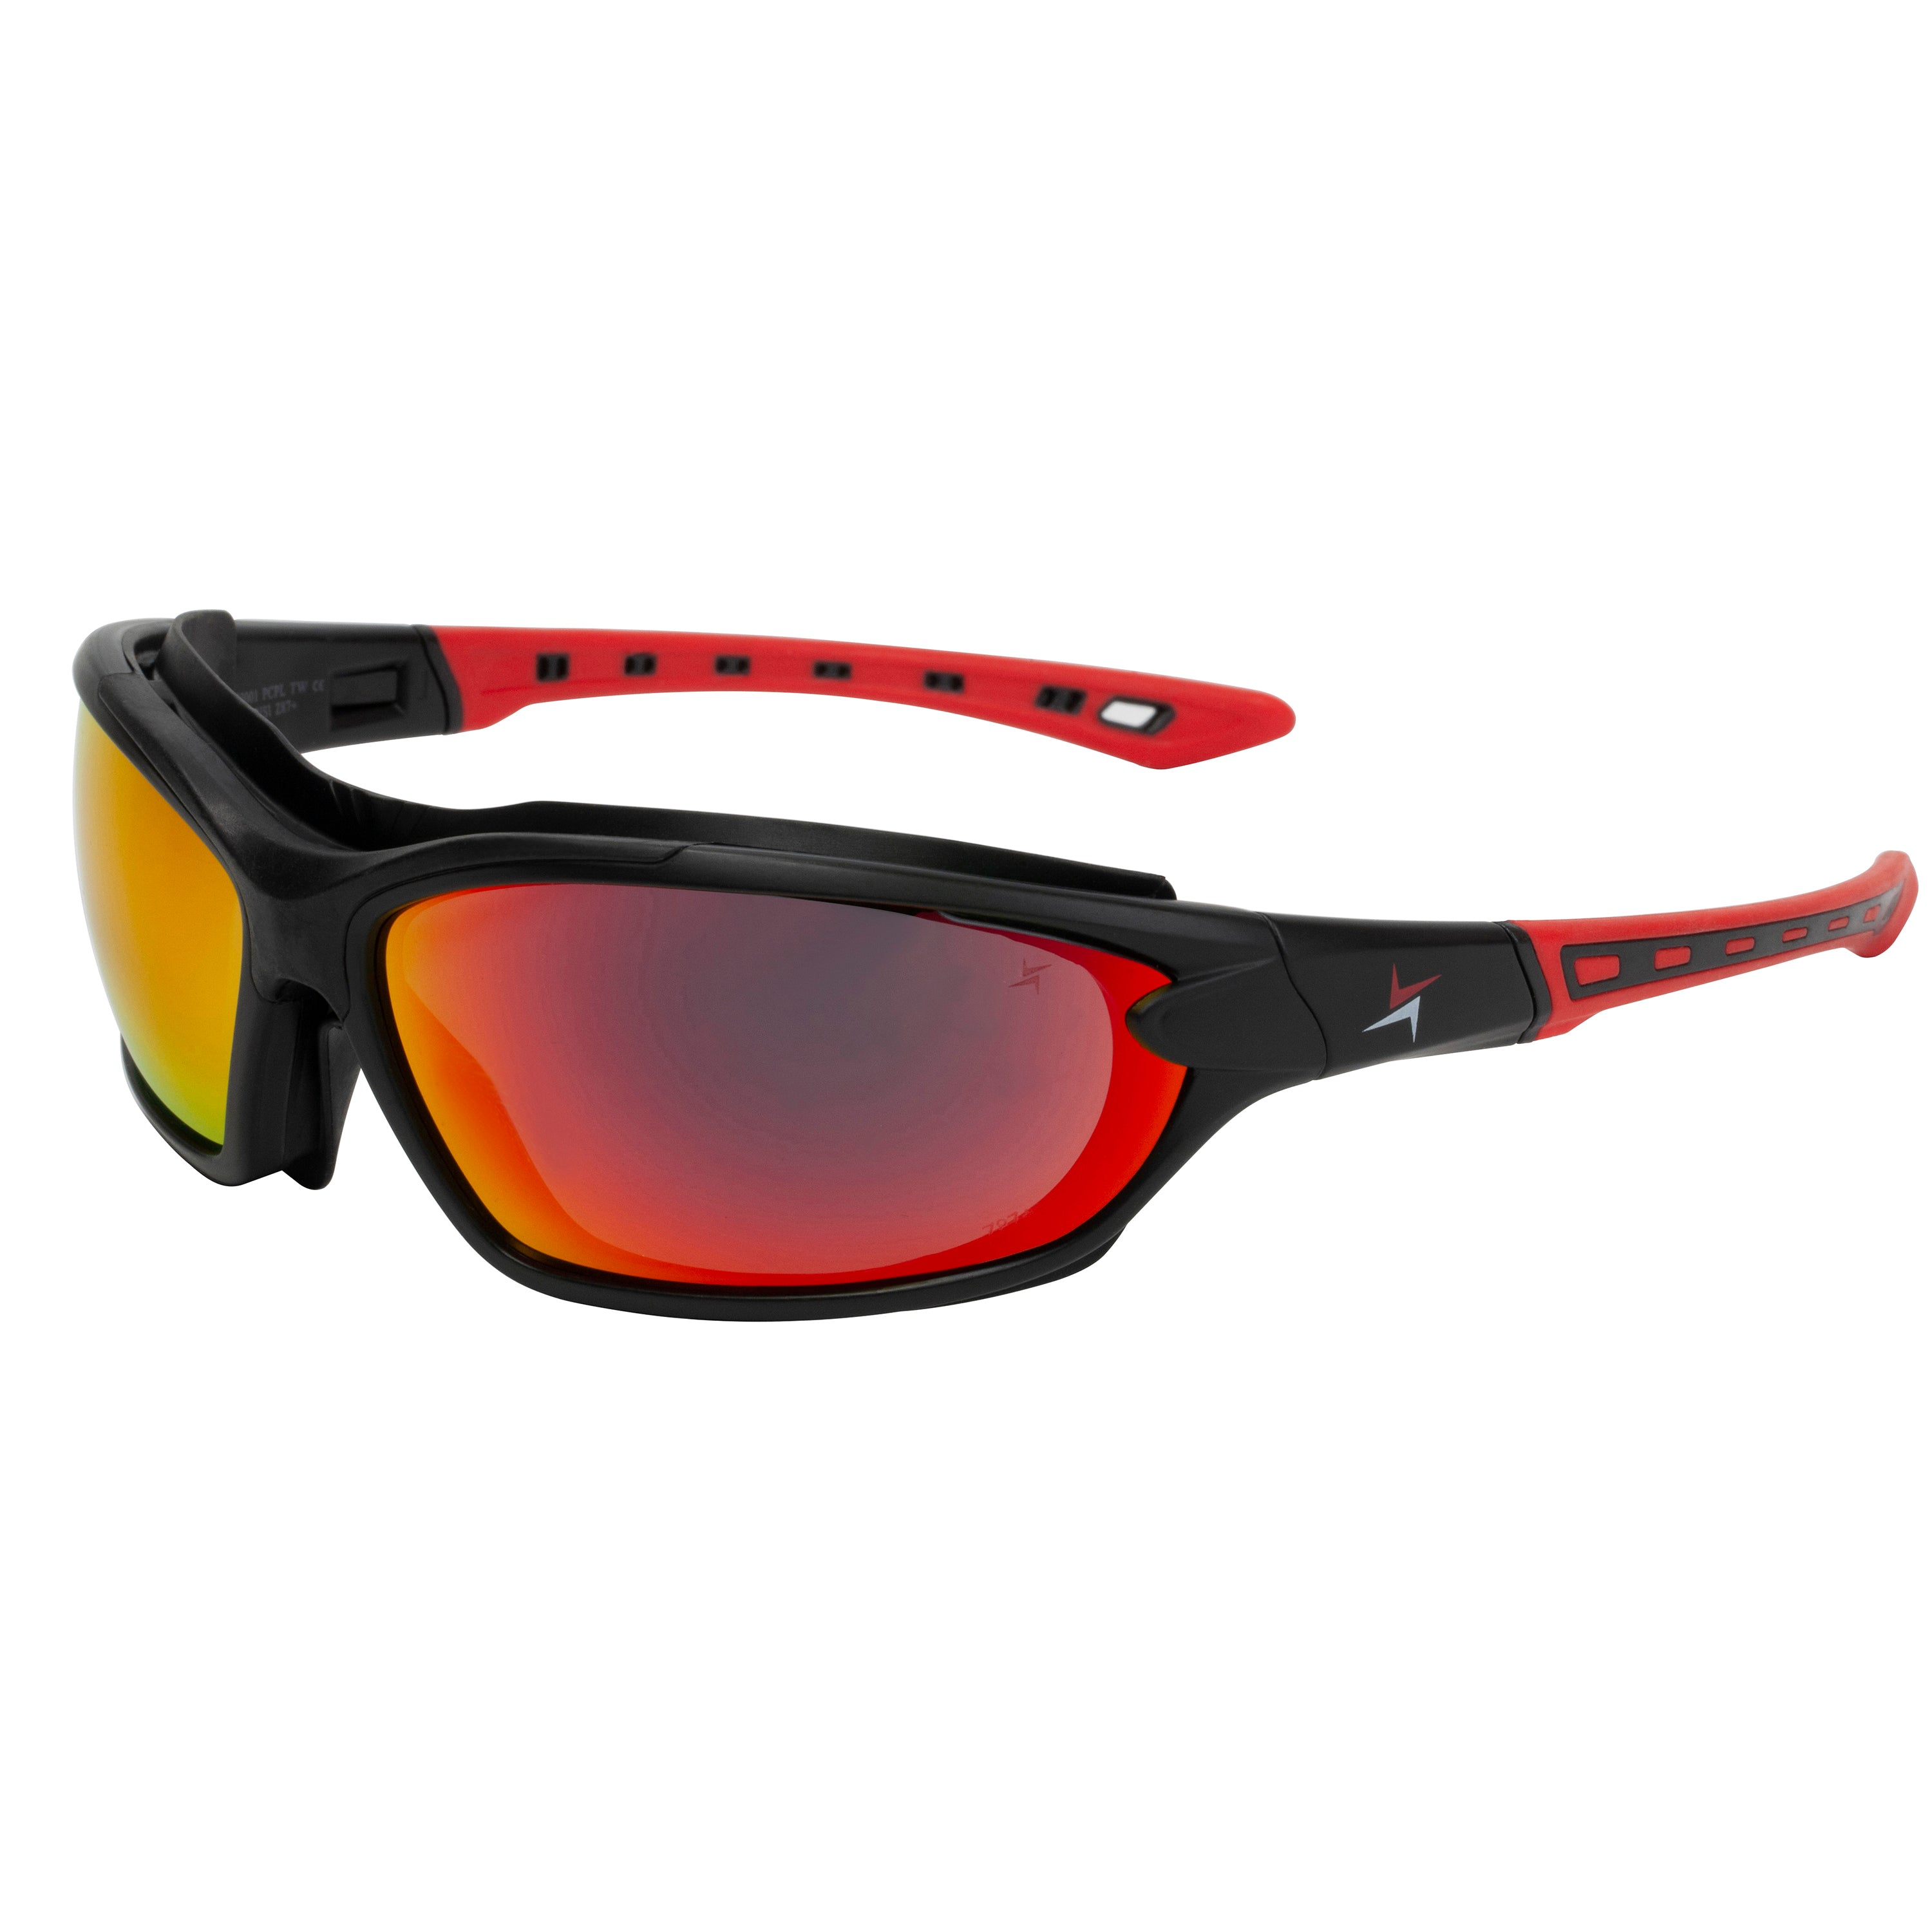 Polycarbonate Polarized Red Mirror Lens Sport Safety Sunglasses with Swappable Strap and Gasketed Goggle Padding.